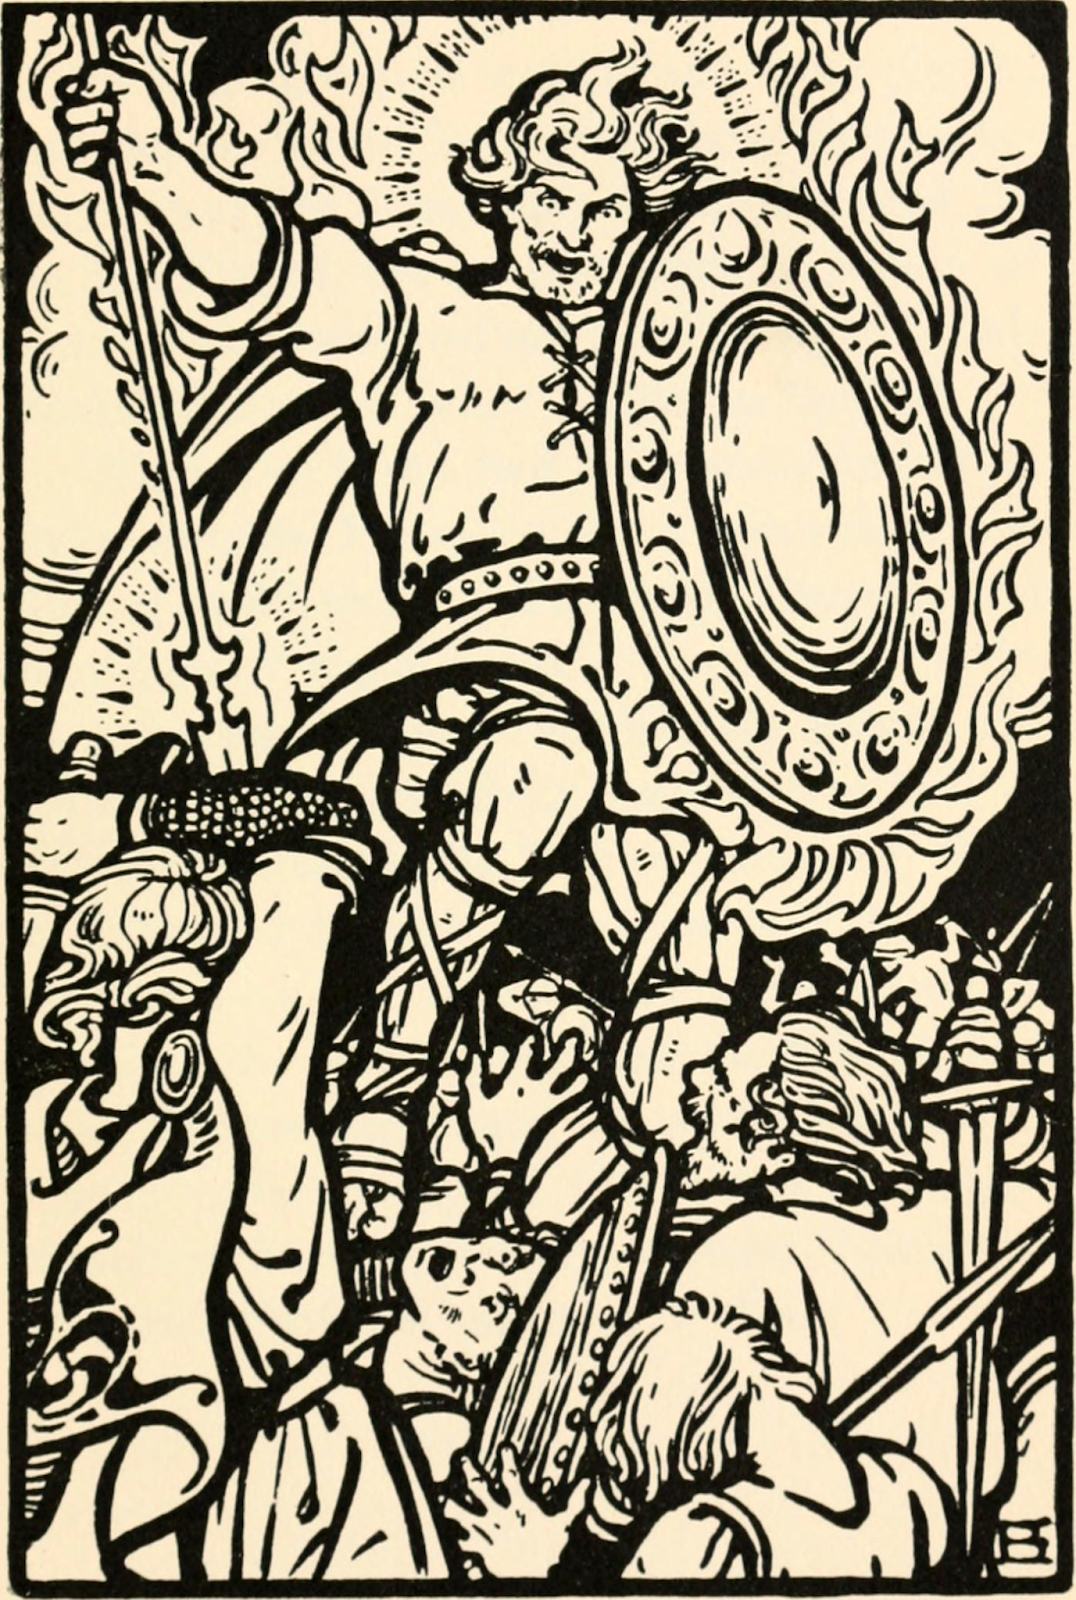 A block print of an early medieval warrior with a long spear and shield, in midair, topping his enemies.